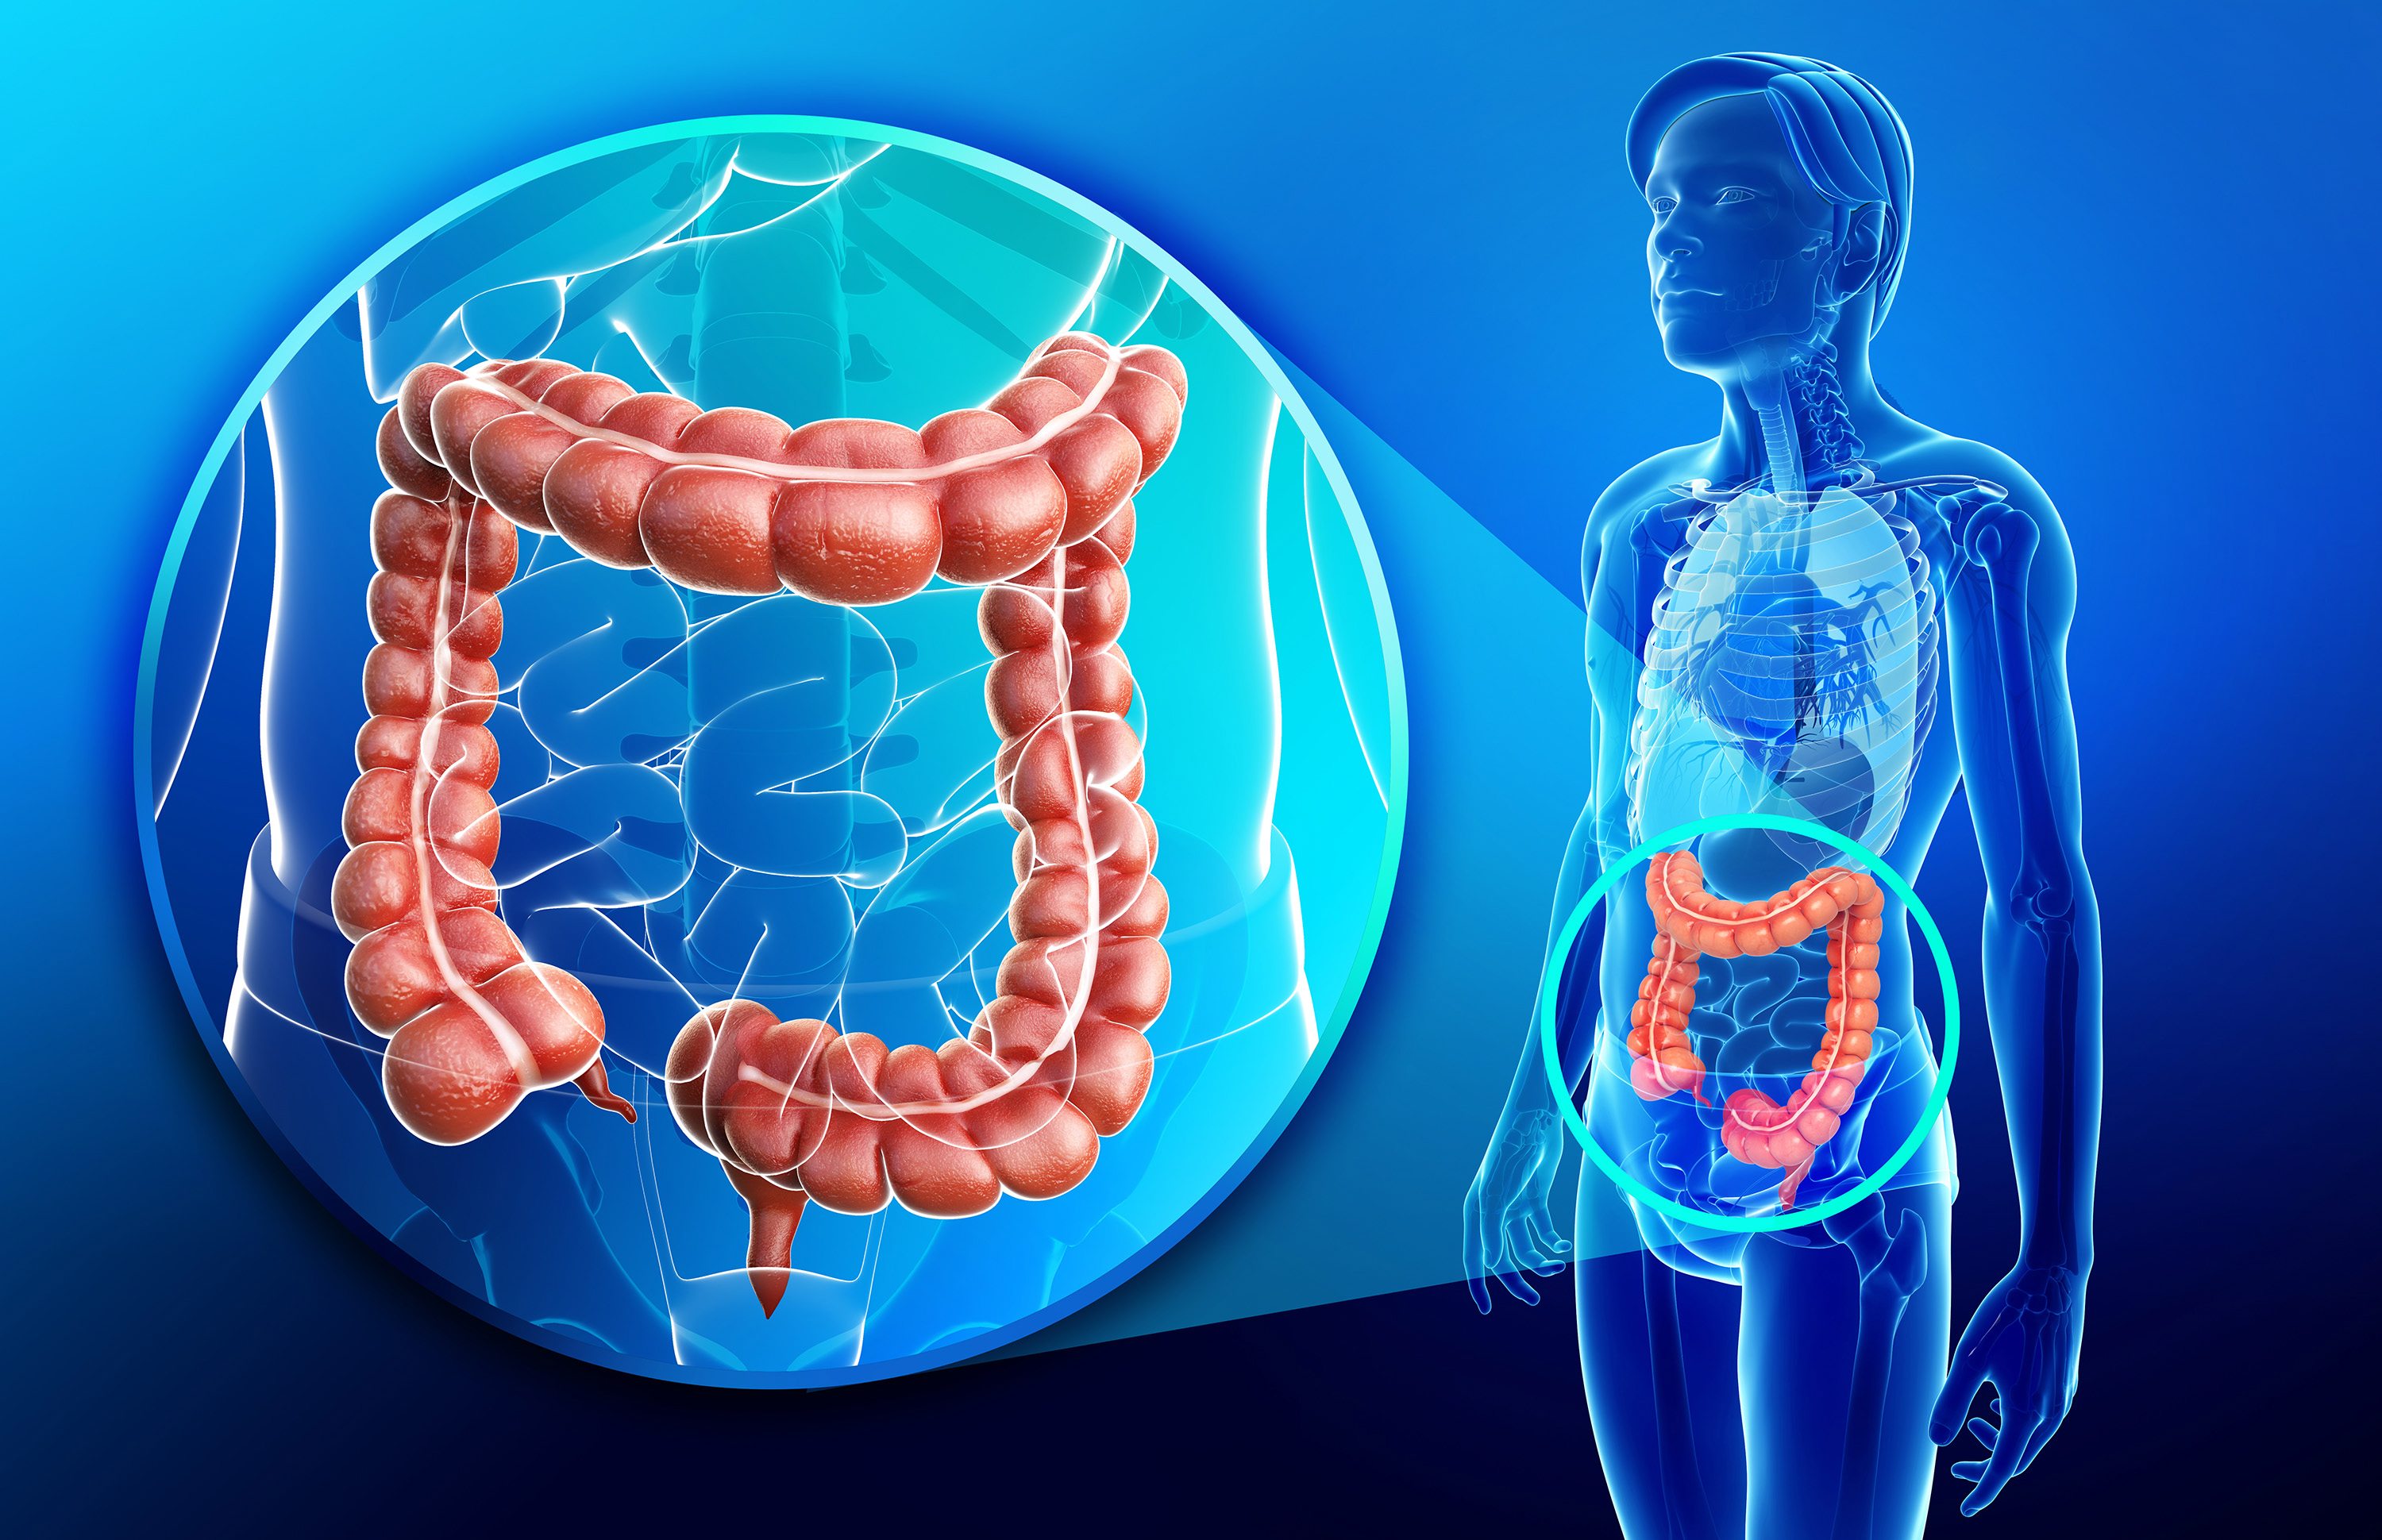 Roughly 140,000 people are diagnosed with colorectal cancer in the United States each year.